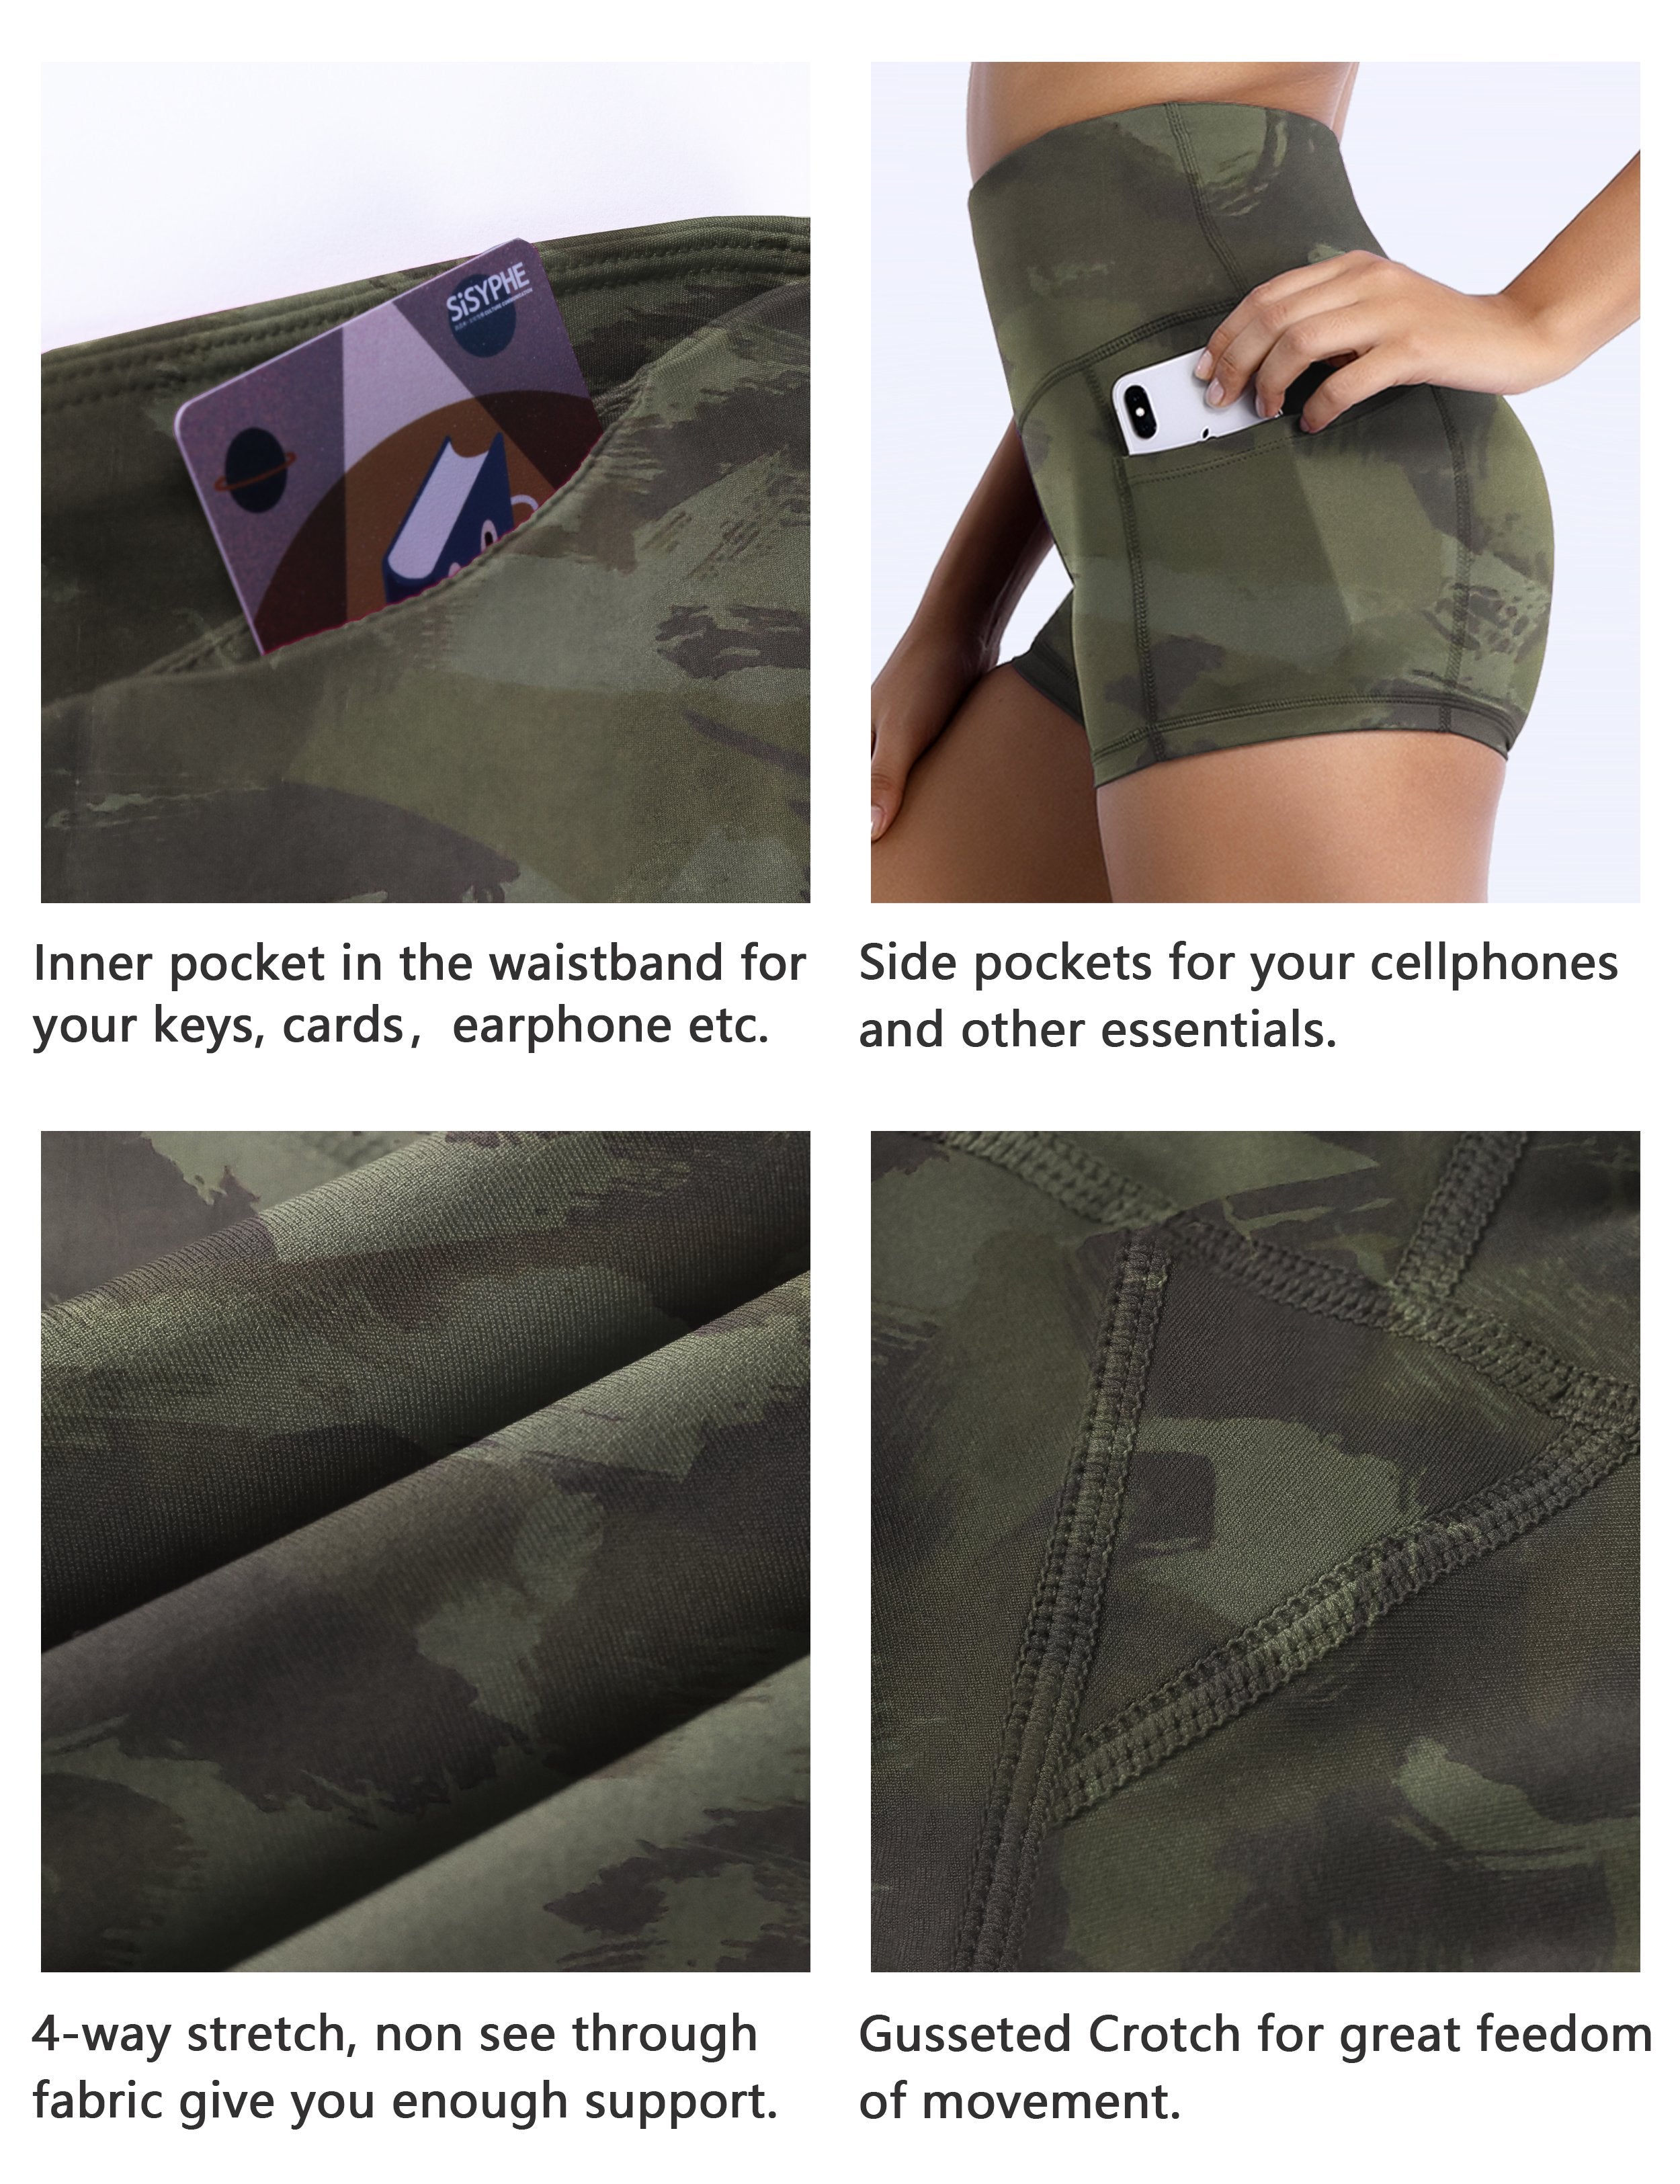 2.5" Printed Side Pockets Yoga Shorts green brushcamo Sleek, soft, smooth and totally comfortable: our newest sexy style is here. Softest-ever fabric High elasticity High density 4-way stretch Fabric doesn't attract lint easily No see-through Moisture-wicking Machine wash 78% Polyester, 22% Spandex